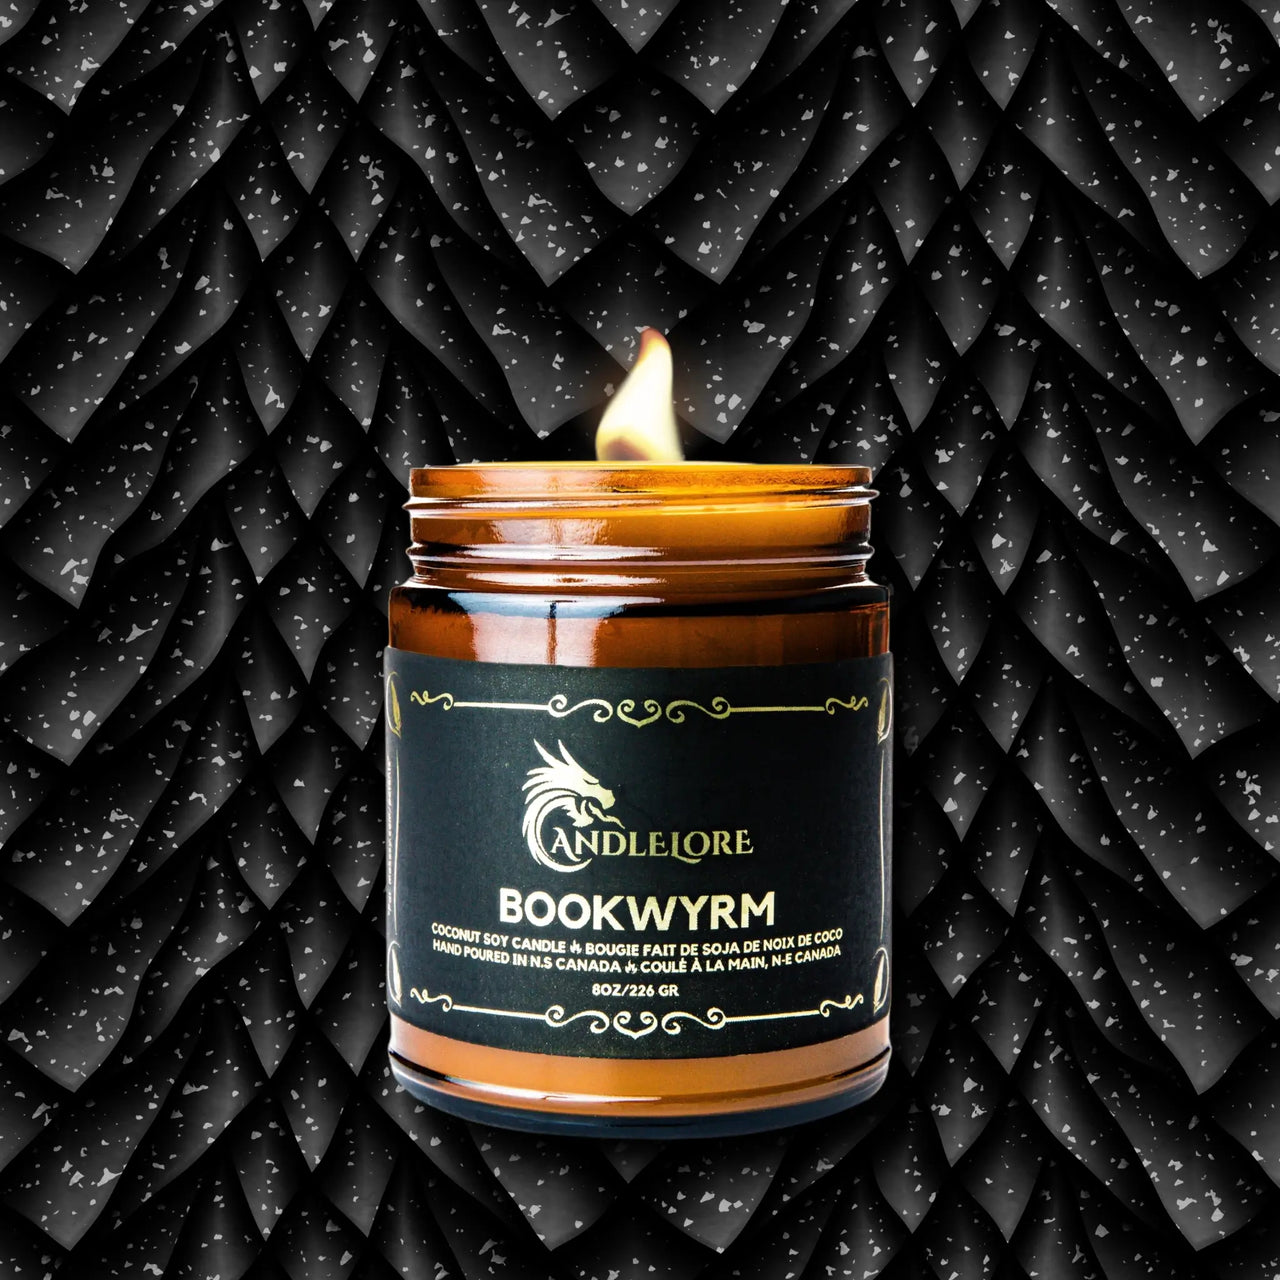 BookWyrm Candle With a background of scales